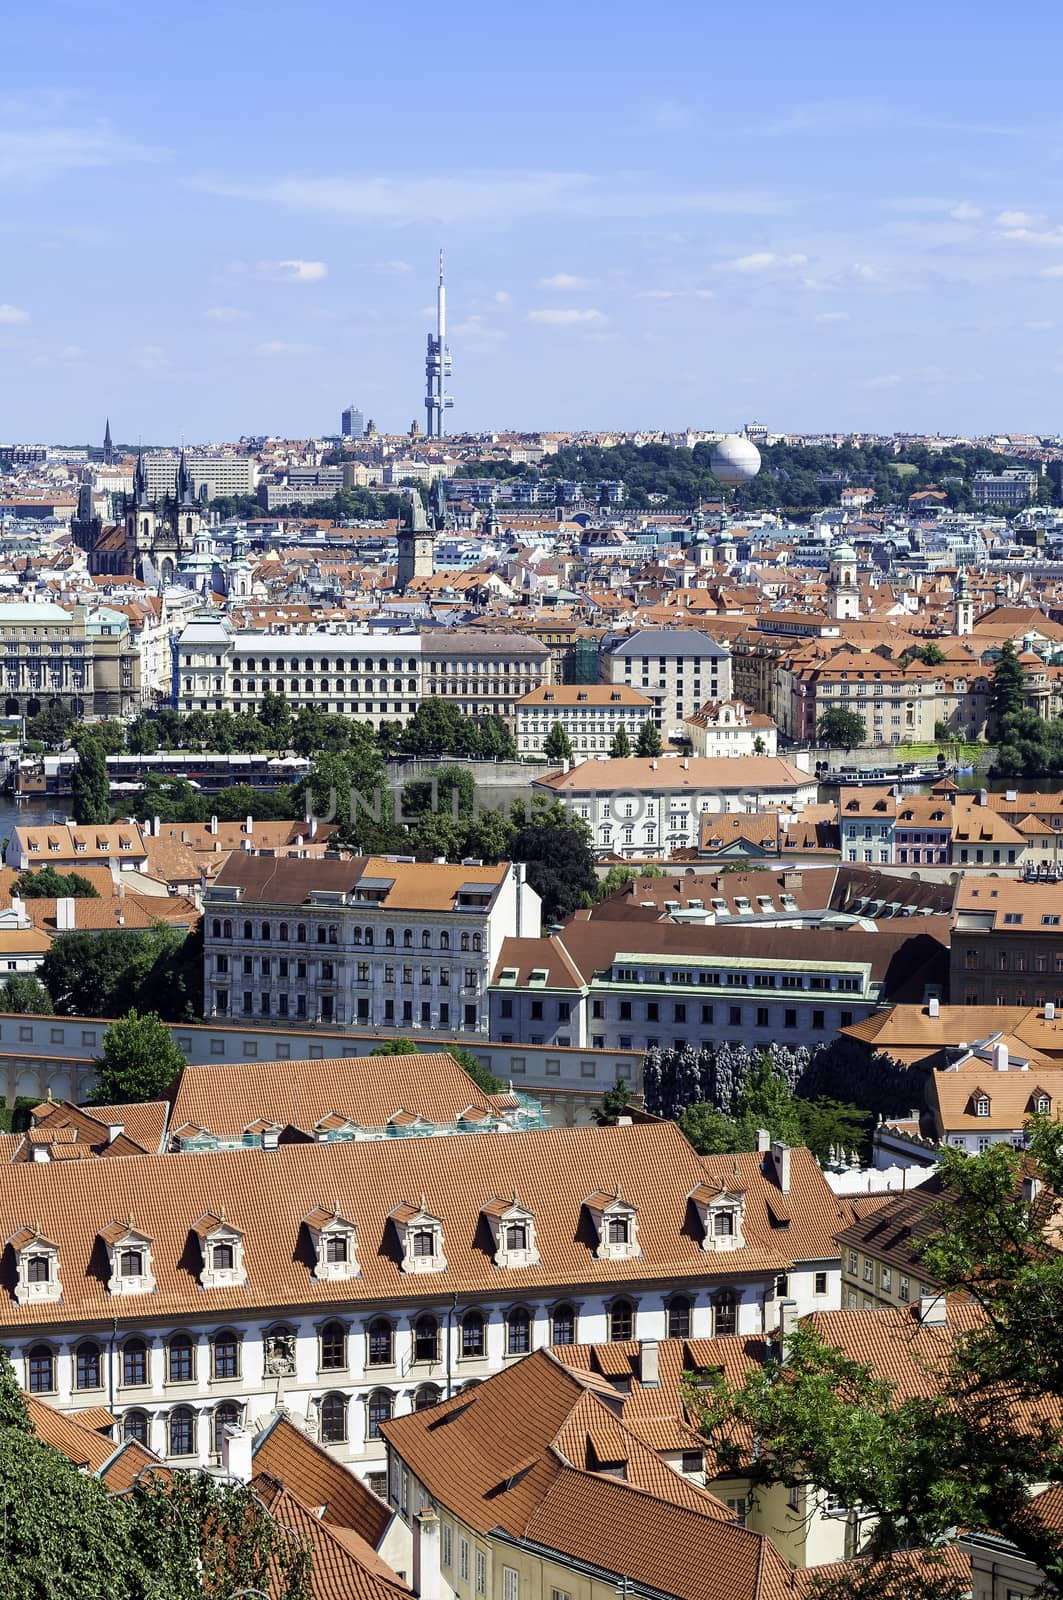 View of the City of Prague, in the Czech Republic.